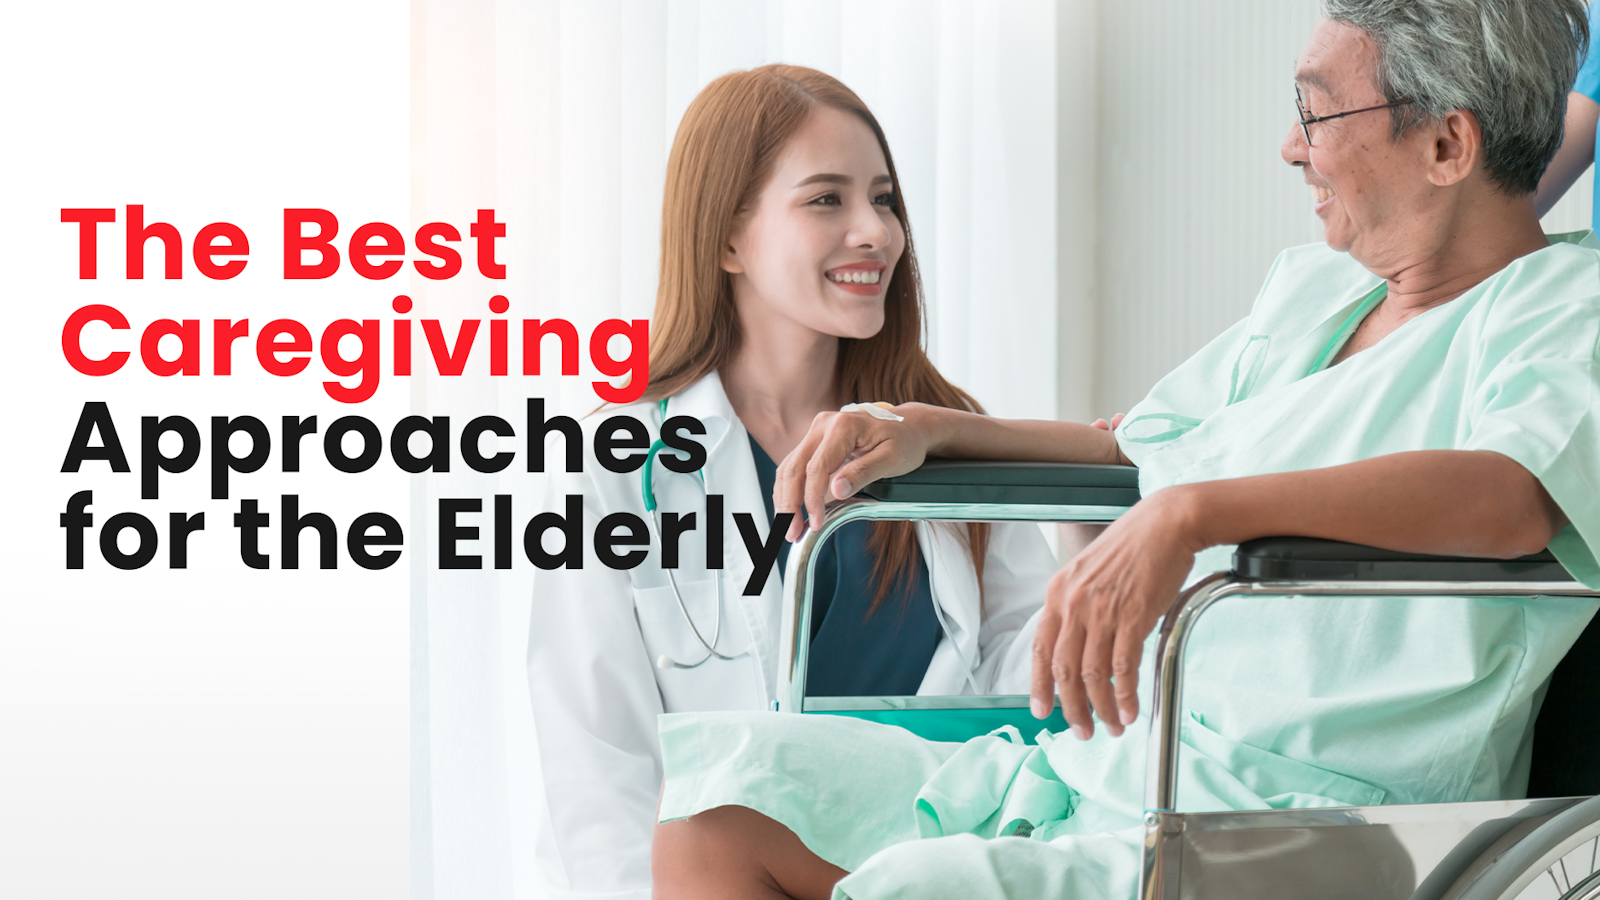 The Best Caregiving Approaches for the Elderly